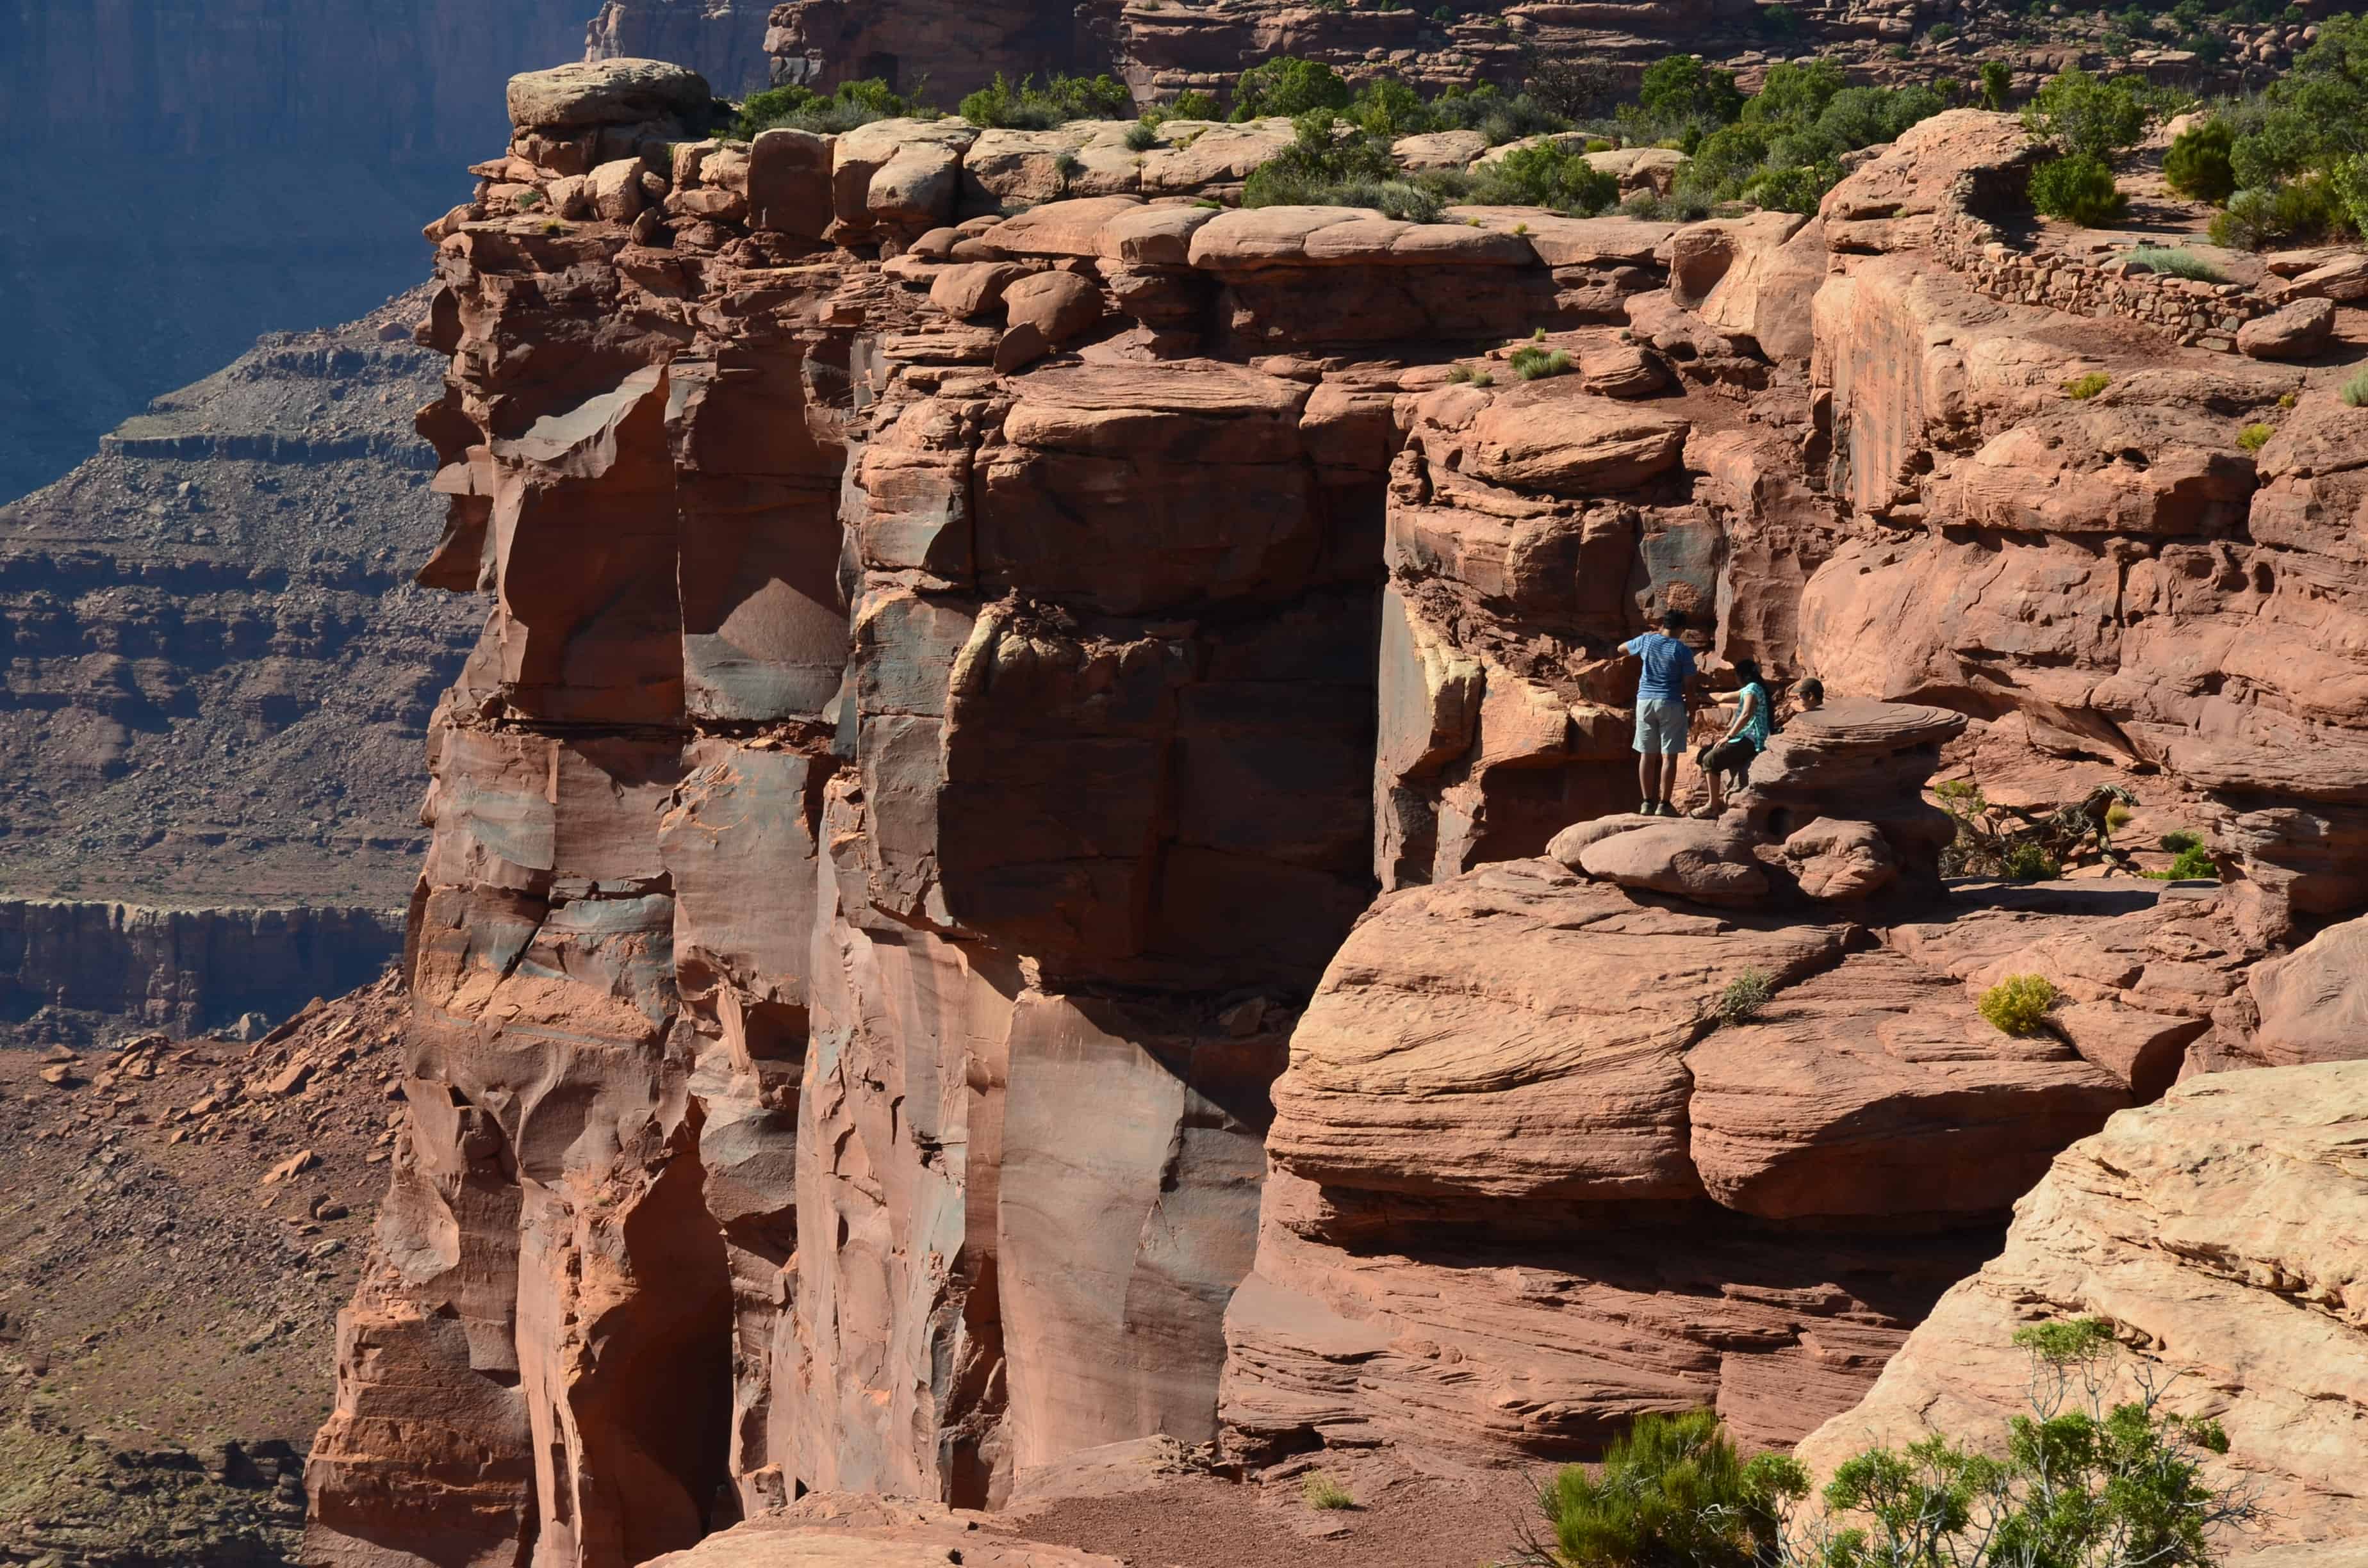 Some intrepid hikers at Dead Horse Point State Park in Utah